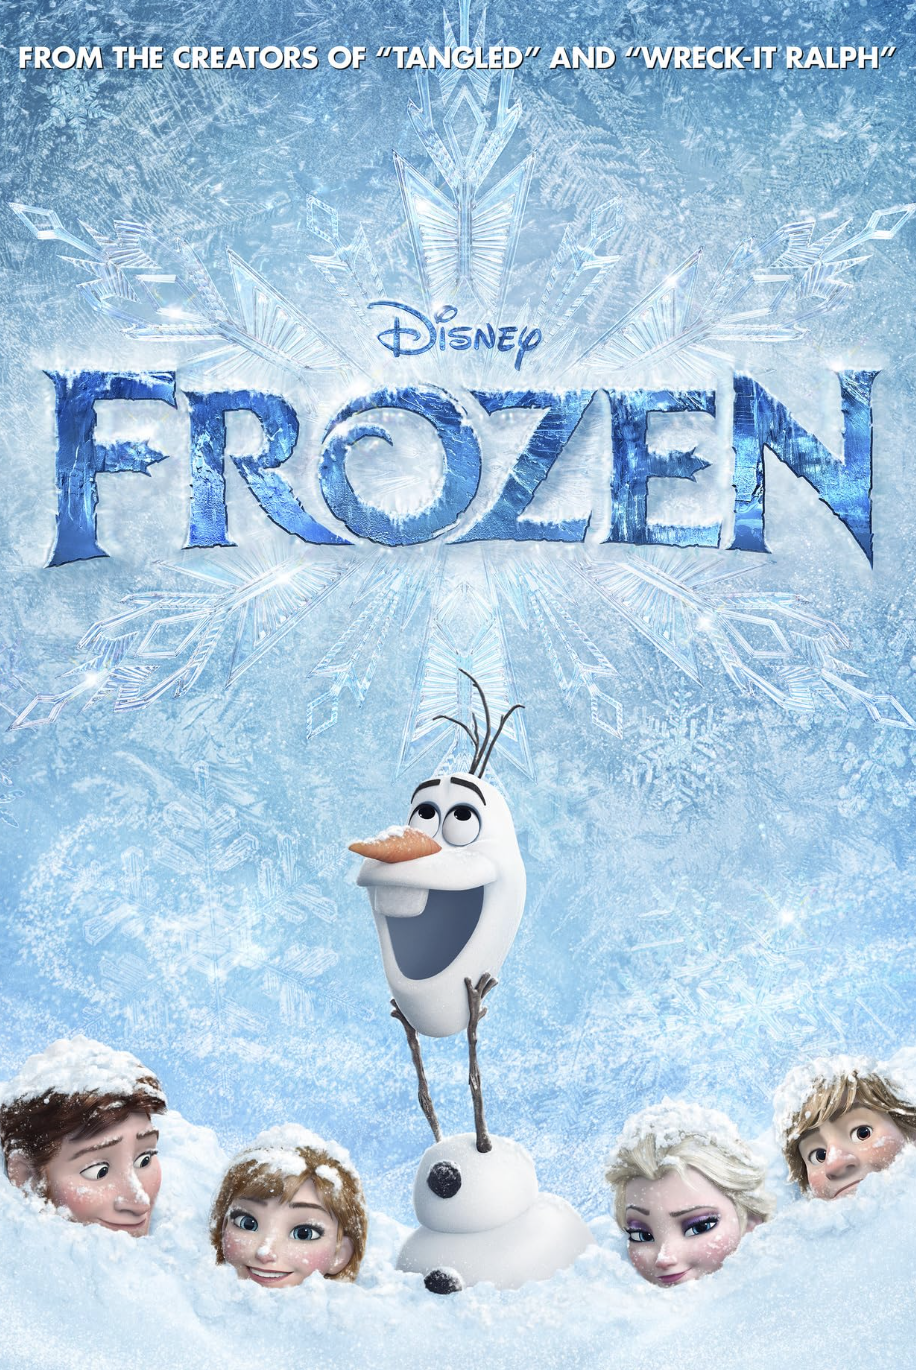 Frozen III Poster (Made by Myself) Based on the Theory of 8 Spirits : r/ Frozen